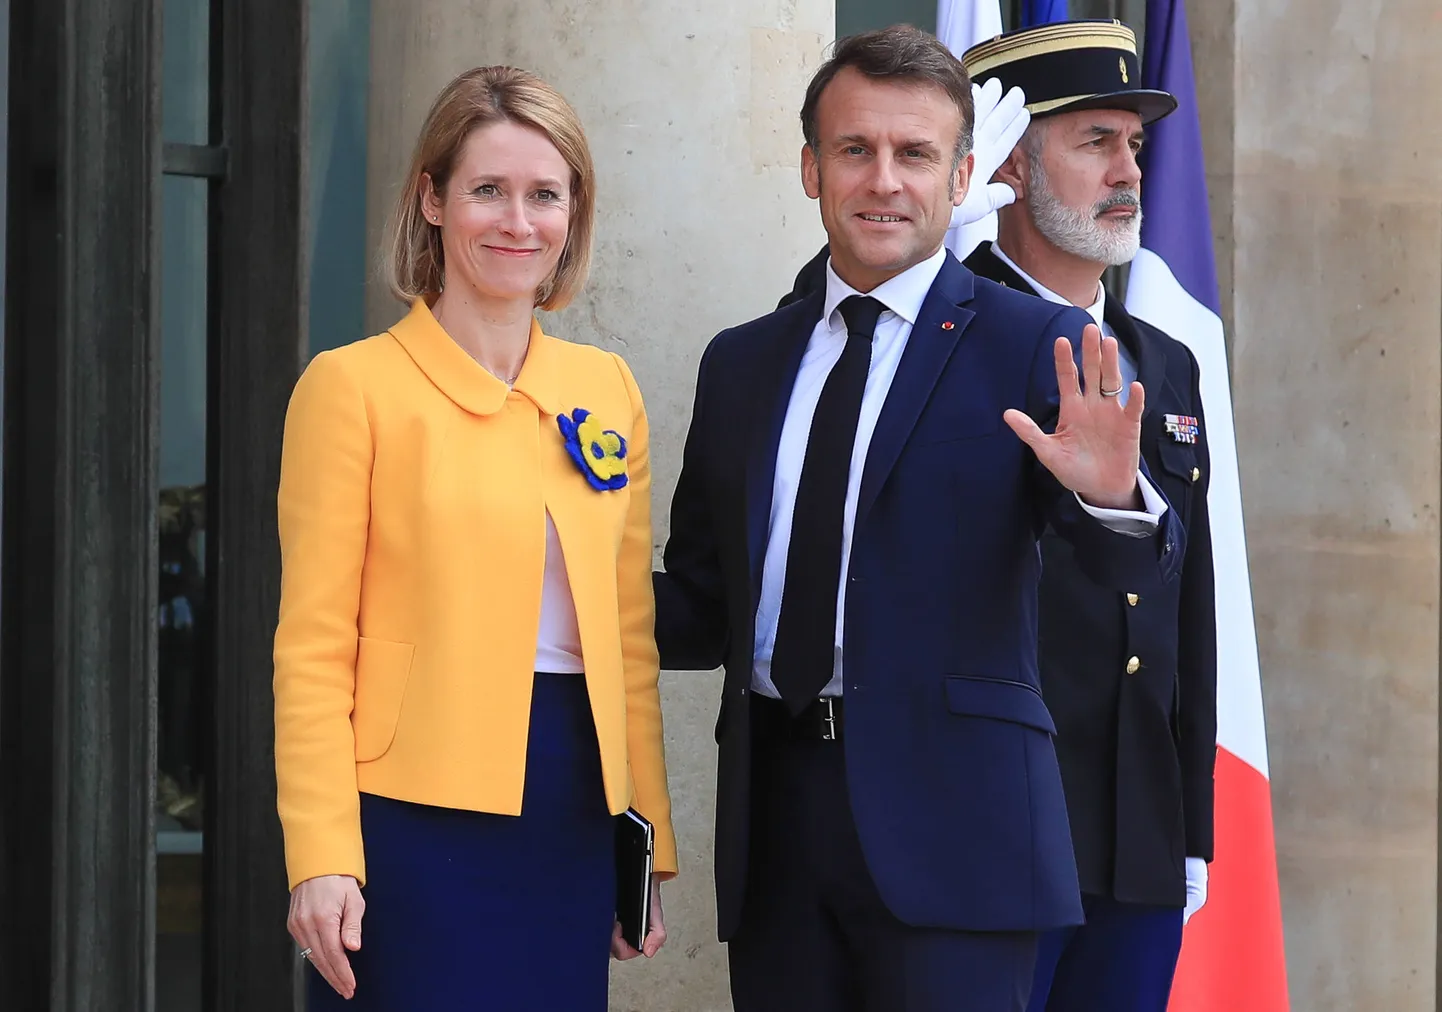 France's President Emmanuel Macron waves as he welcomes Estonia's Prime Minister Kaja Kallas for a meeting at the Elysee Palace in Paris.